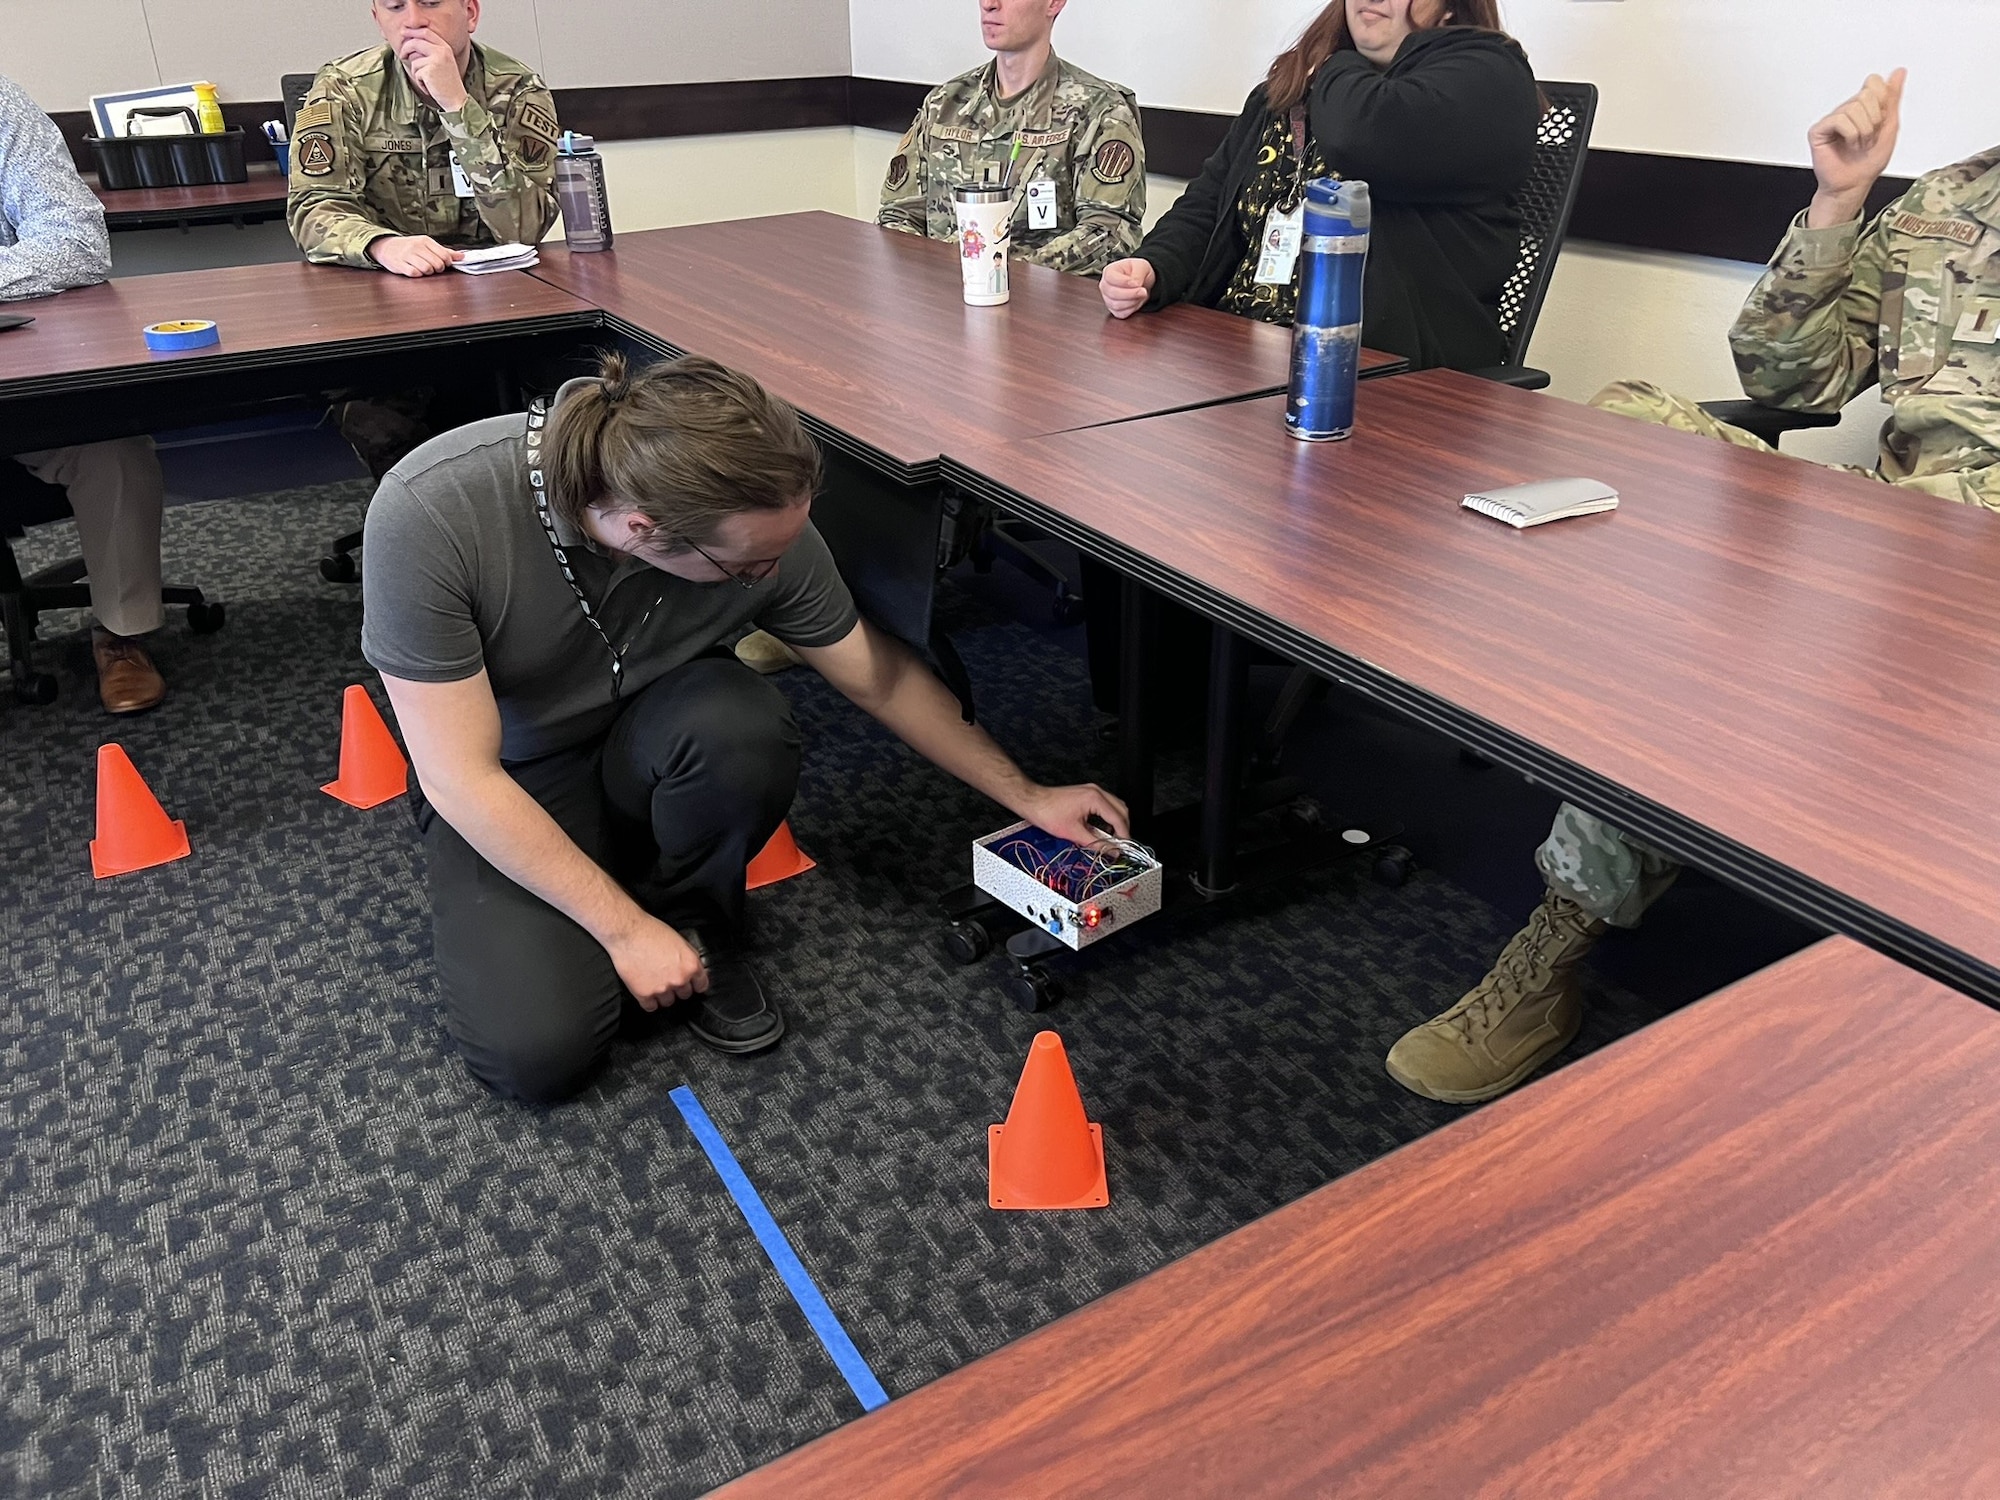 Instructor Shane Melacon readies the off-board sensor suite for developmental test data collection as part of an operational assessment which is an early opportunity for operational testers to gain insight into the operation and performance of a new system.